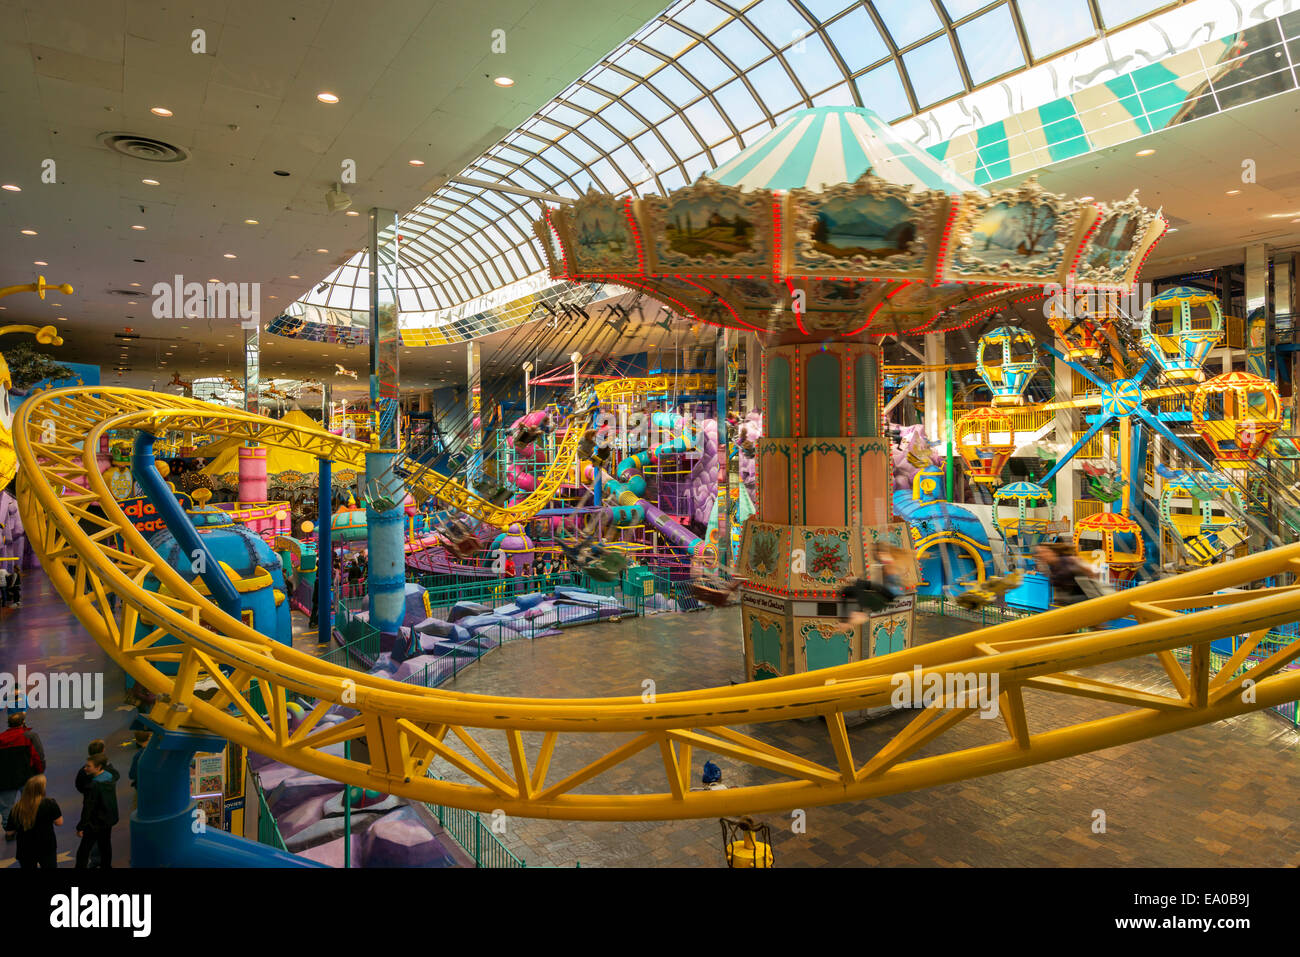 Mall Roller Coaster High Resolution Stock Photography And Images Alamy